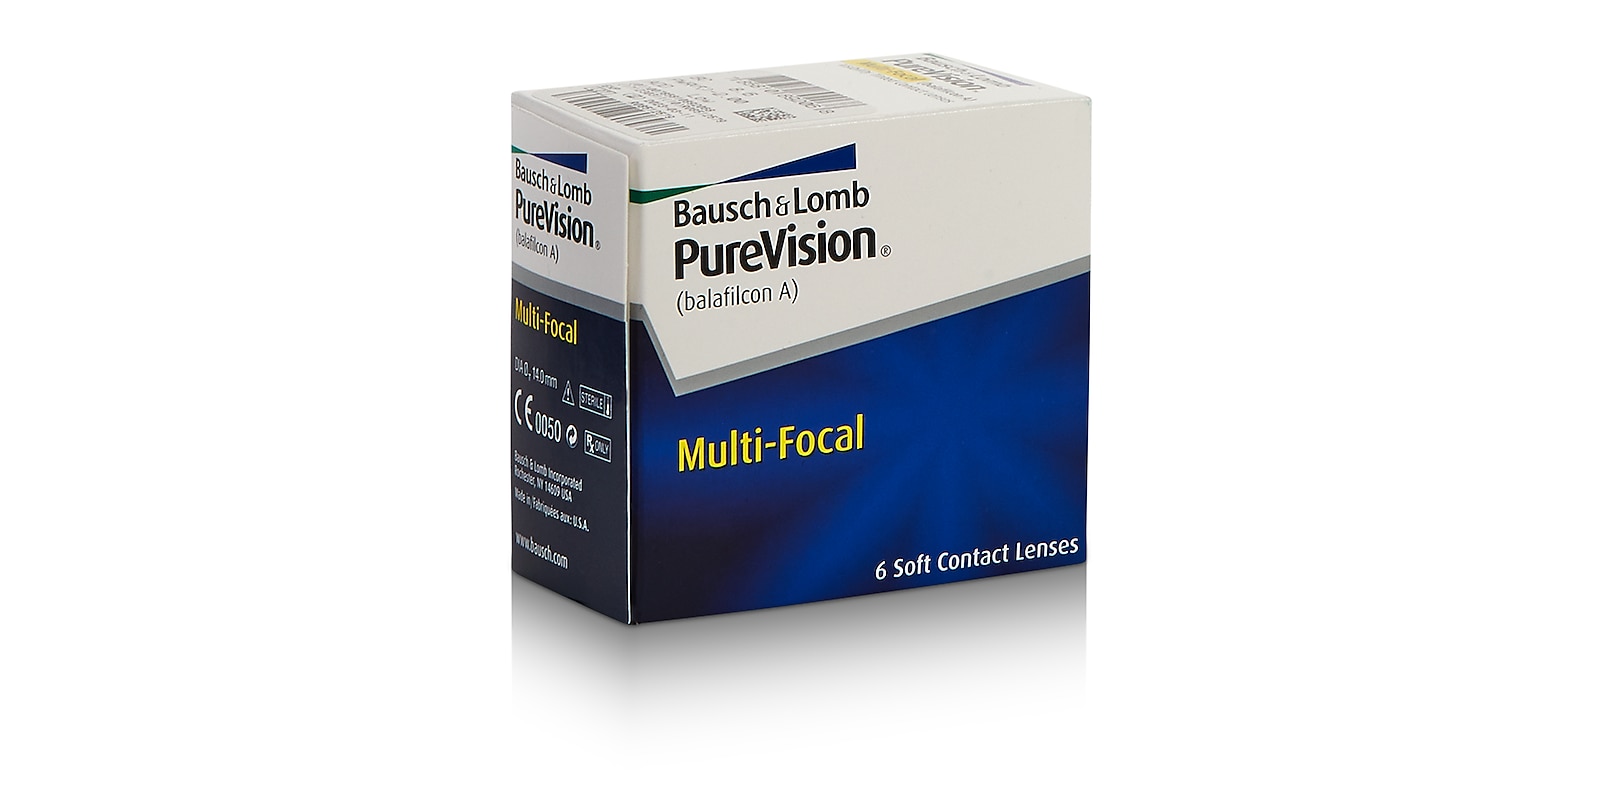 PureVision Multi-Focal, 6 pack contact lenses